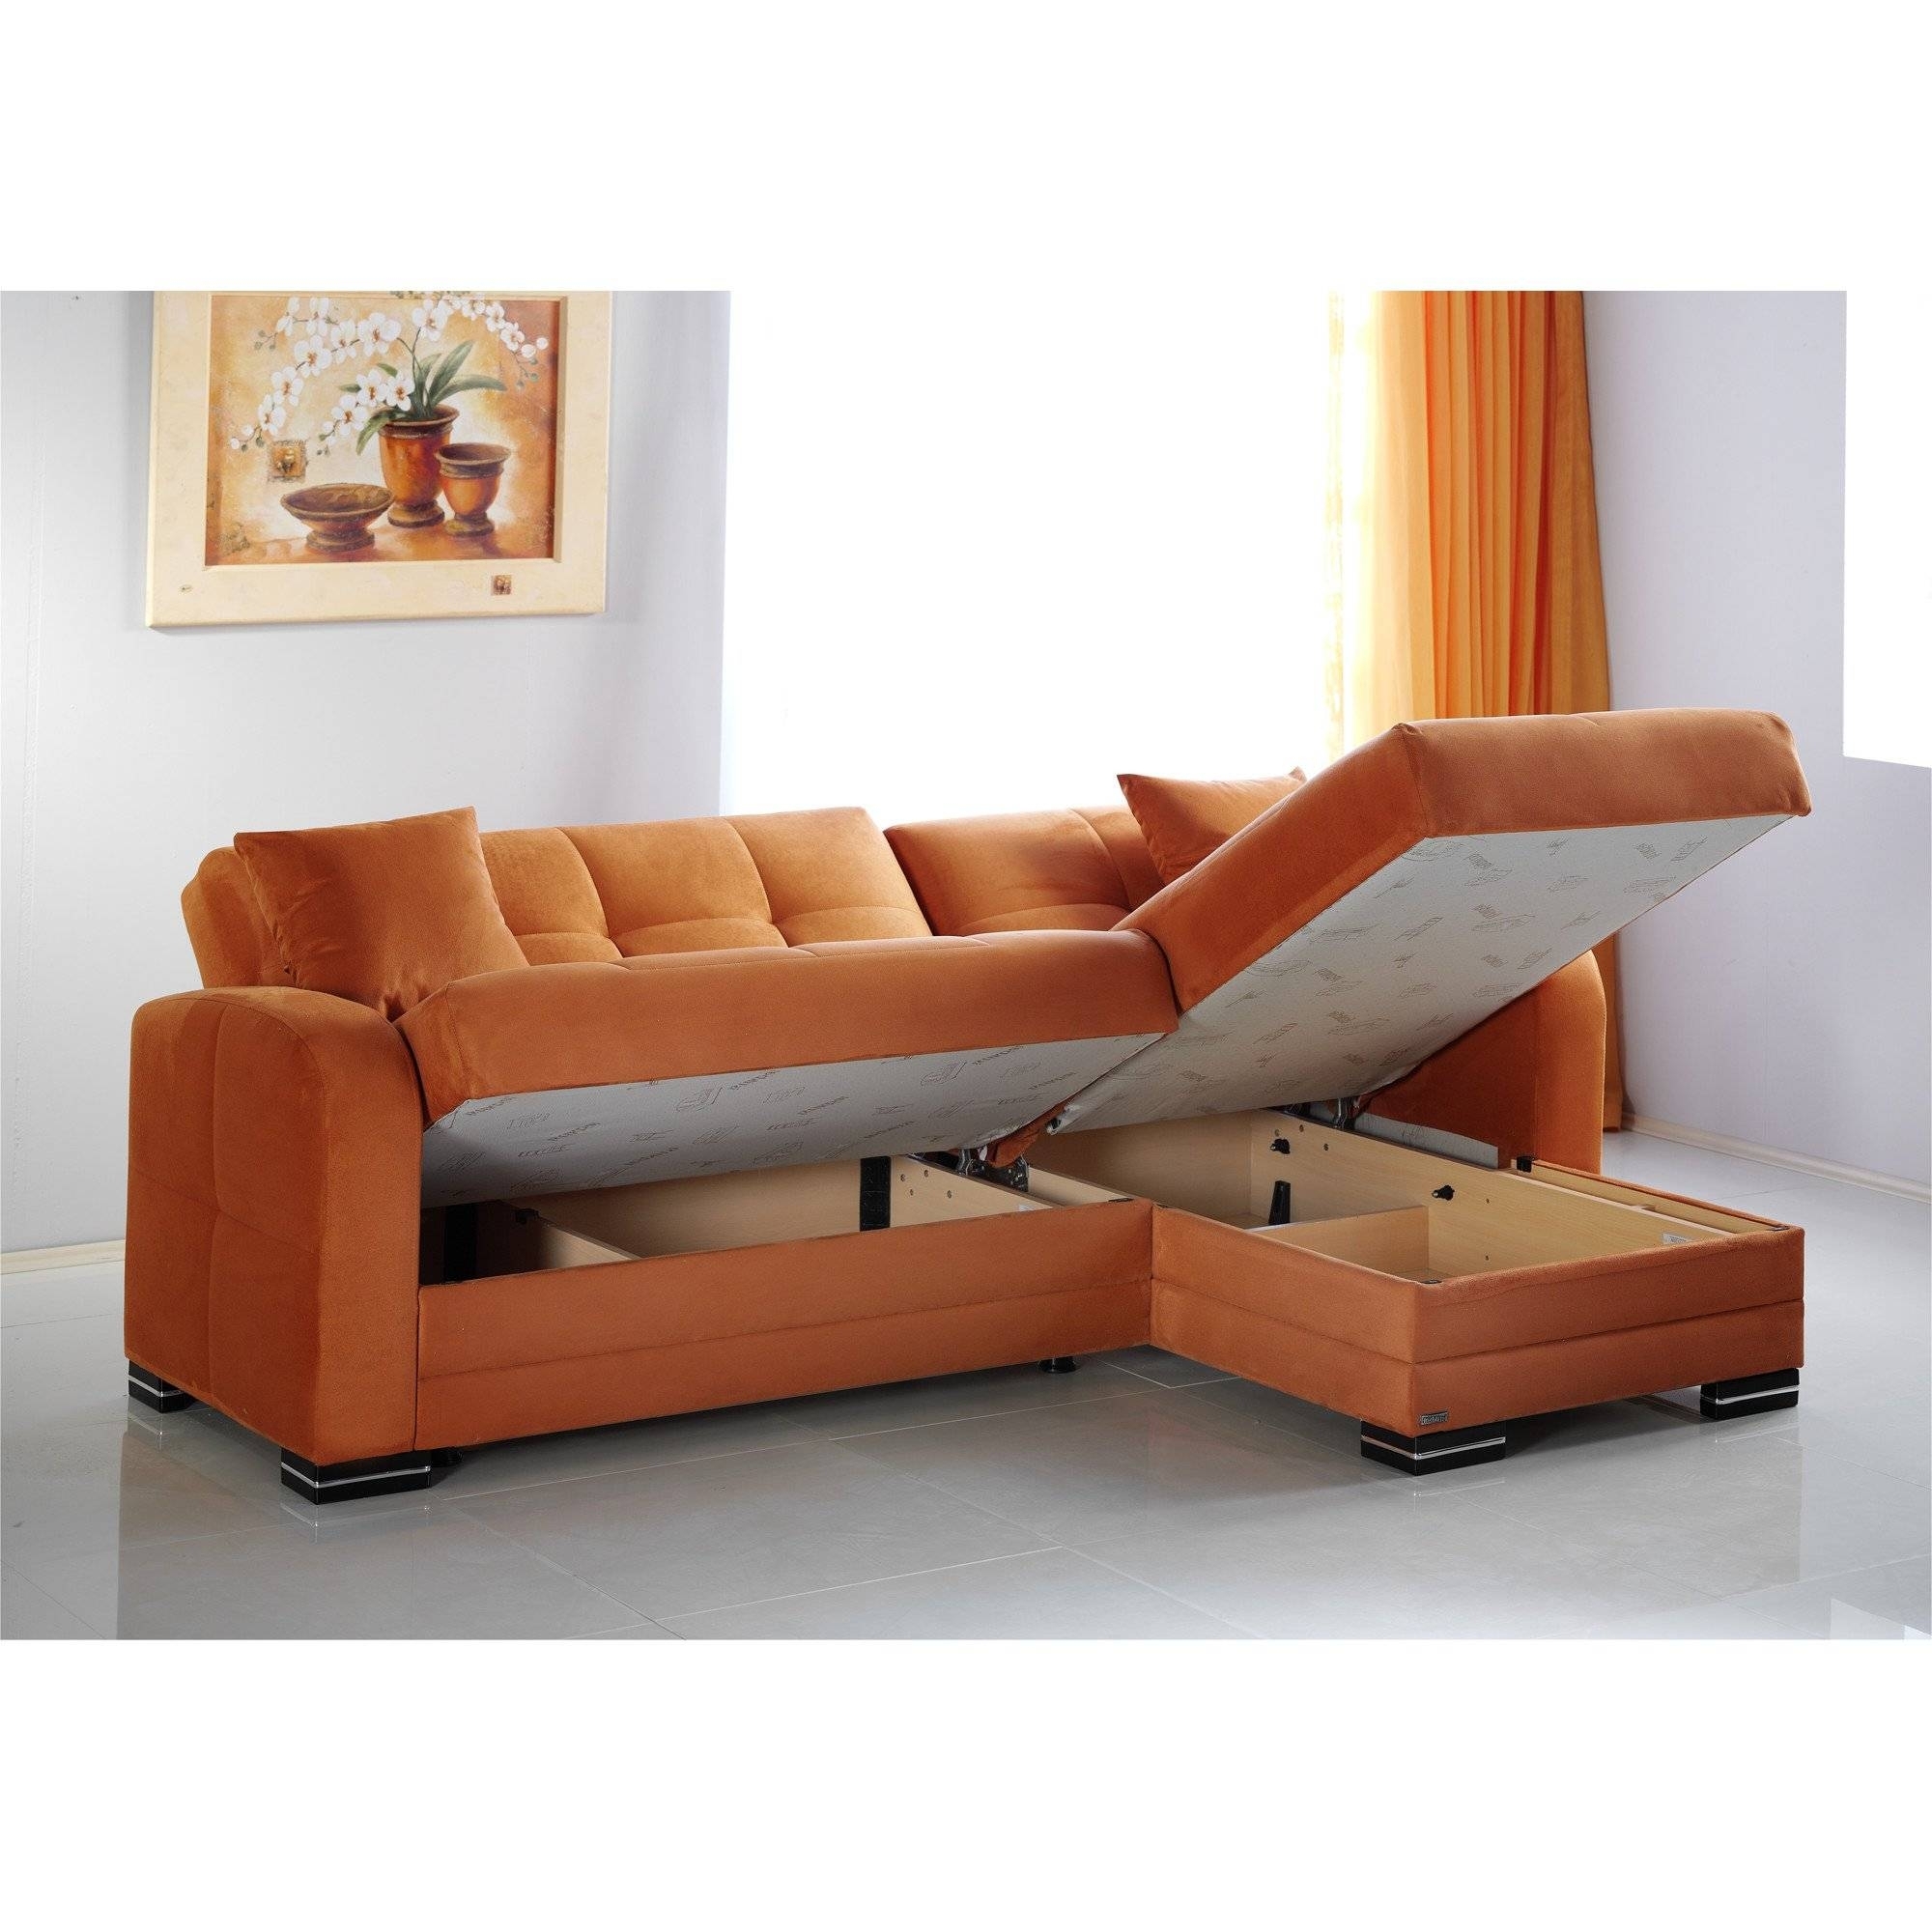 Small Couches For Spaces Visualhunt, Leather Sectional Couches For Small Spaces